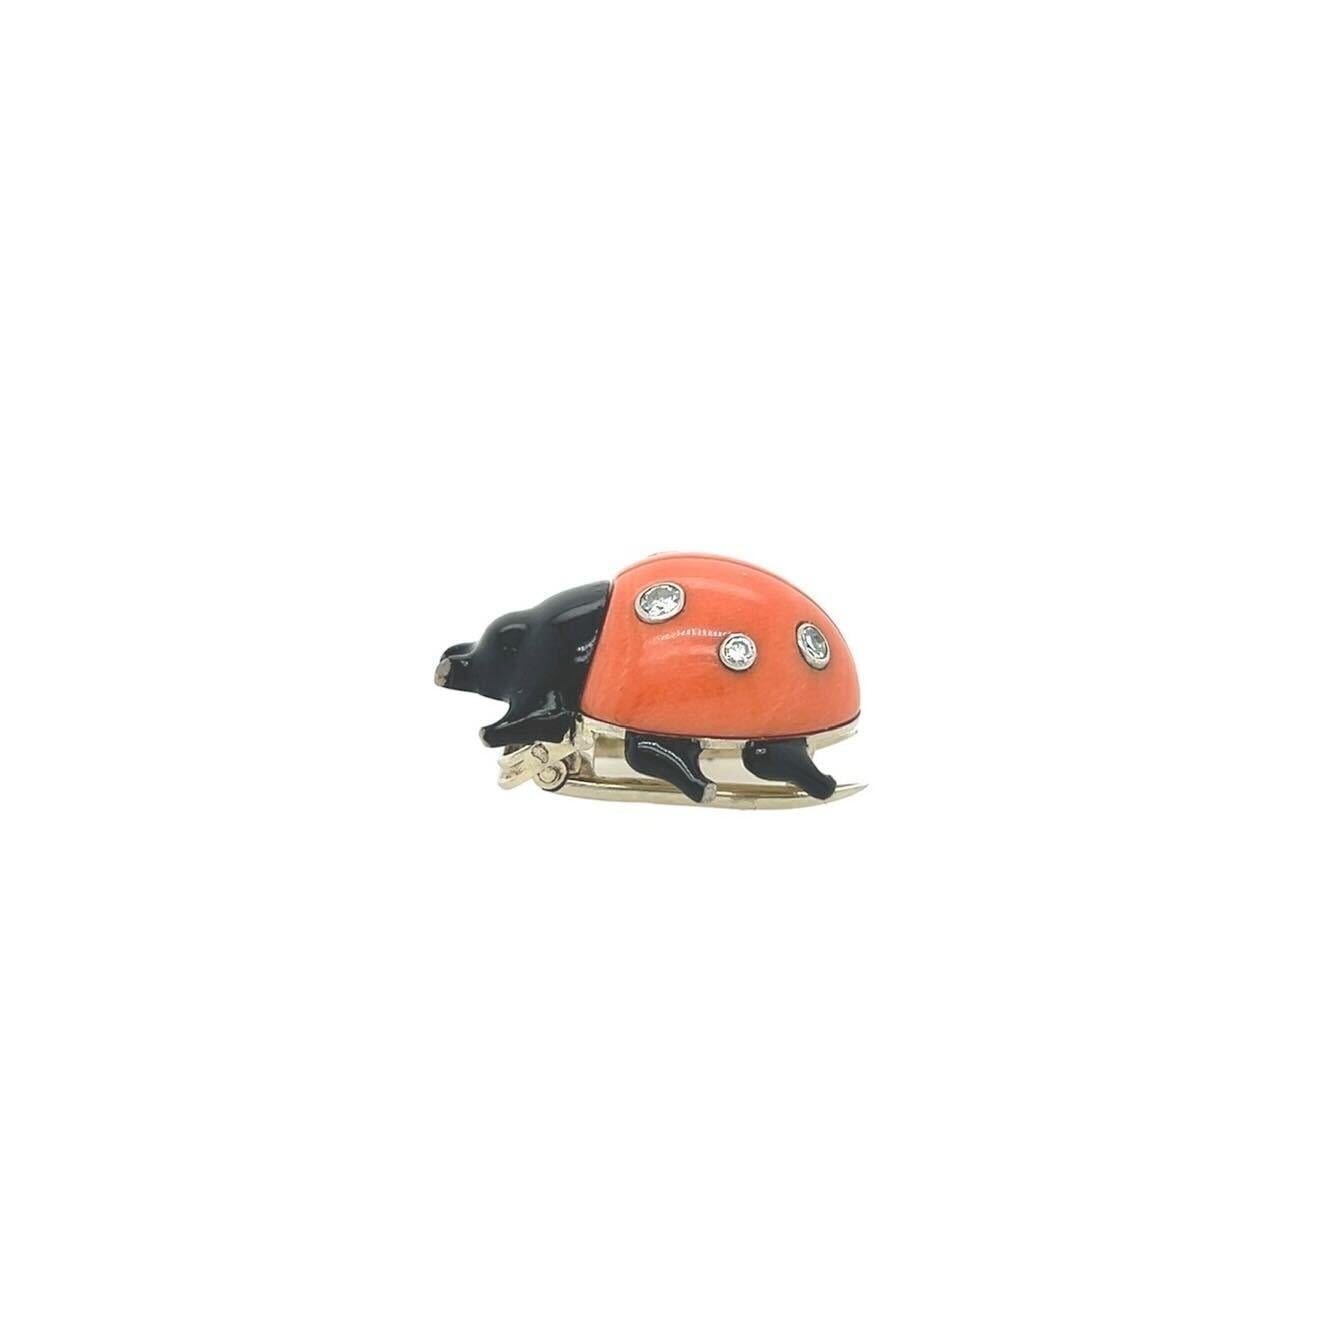  - An 18 karat white gold, black lacquer, diamond and coral ladybug brooch, Cartier, French, circa 1935. Set with six (6) single cut diamonds. Length approximately 7/8 inches. Gross weight approximately 8.5 grams. With maker’s marks for Cartier,